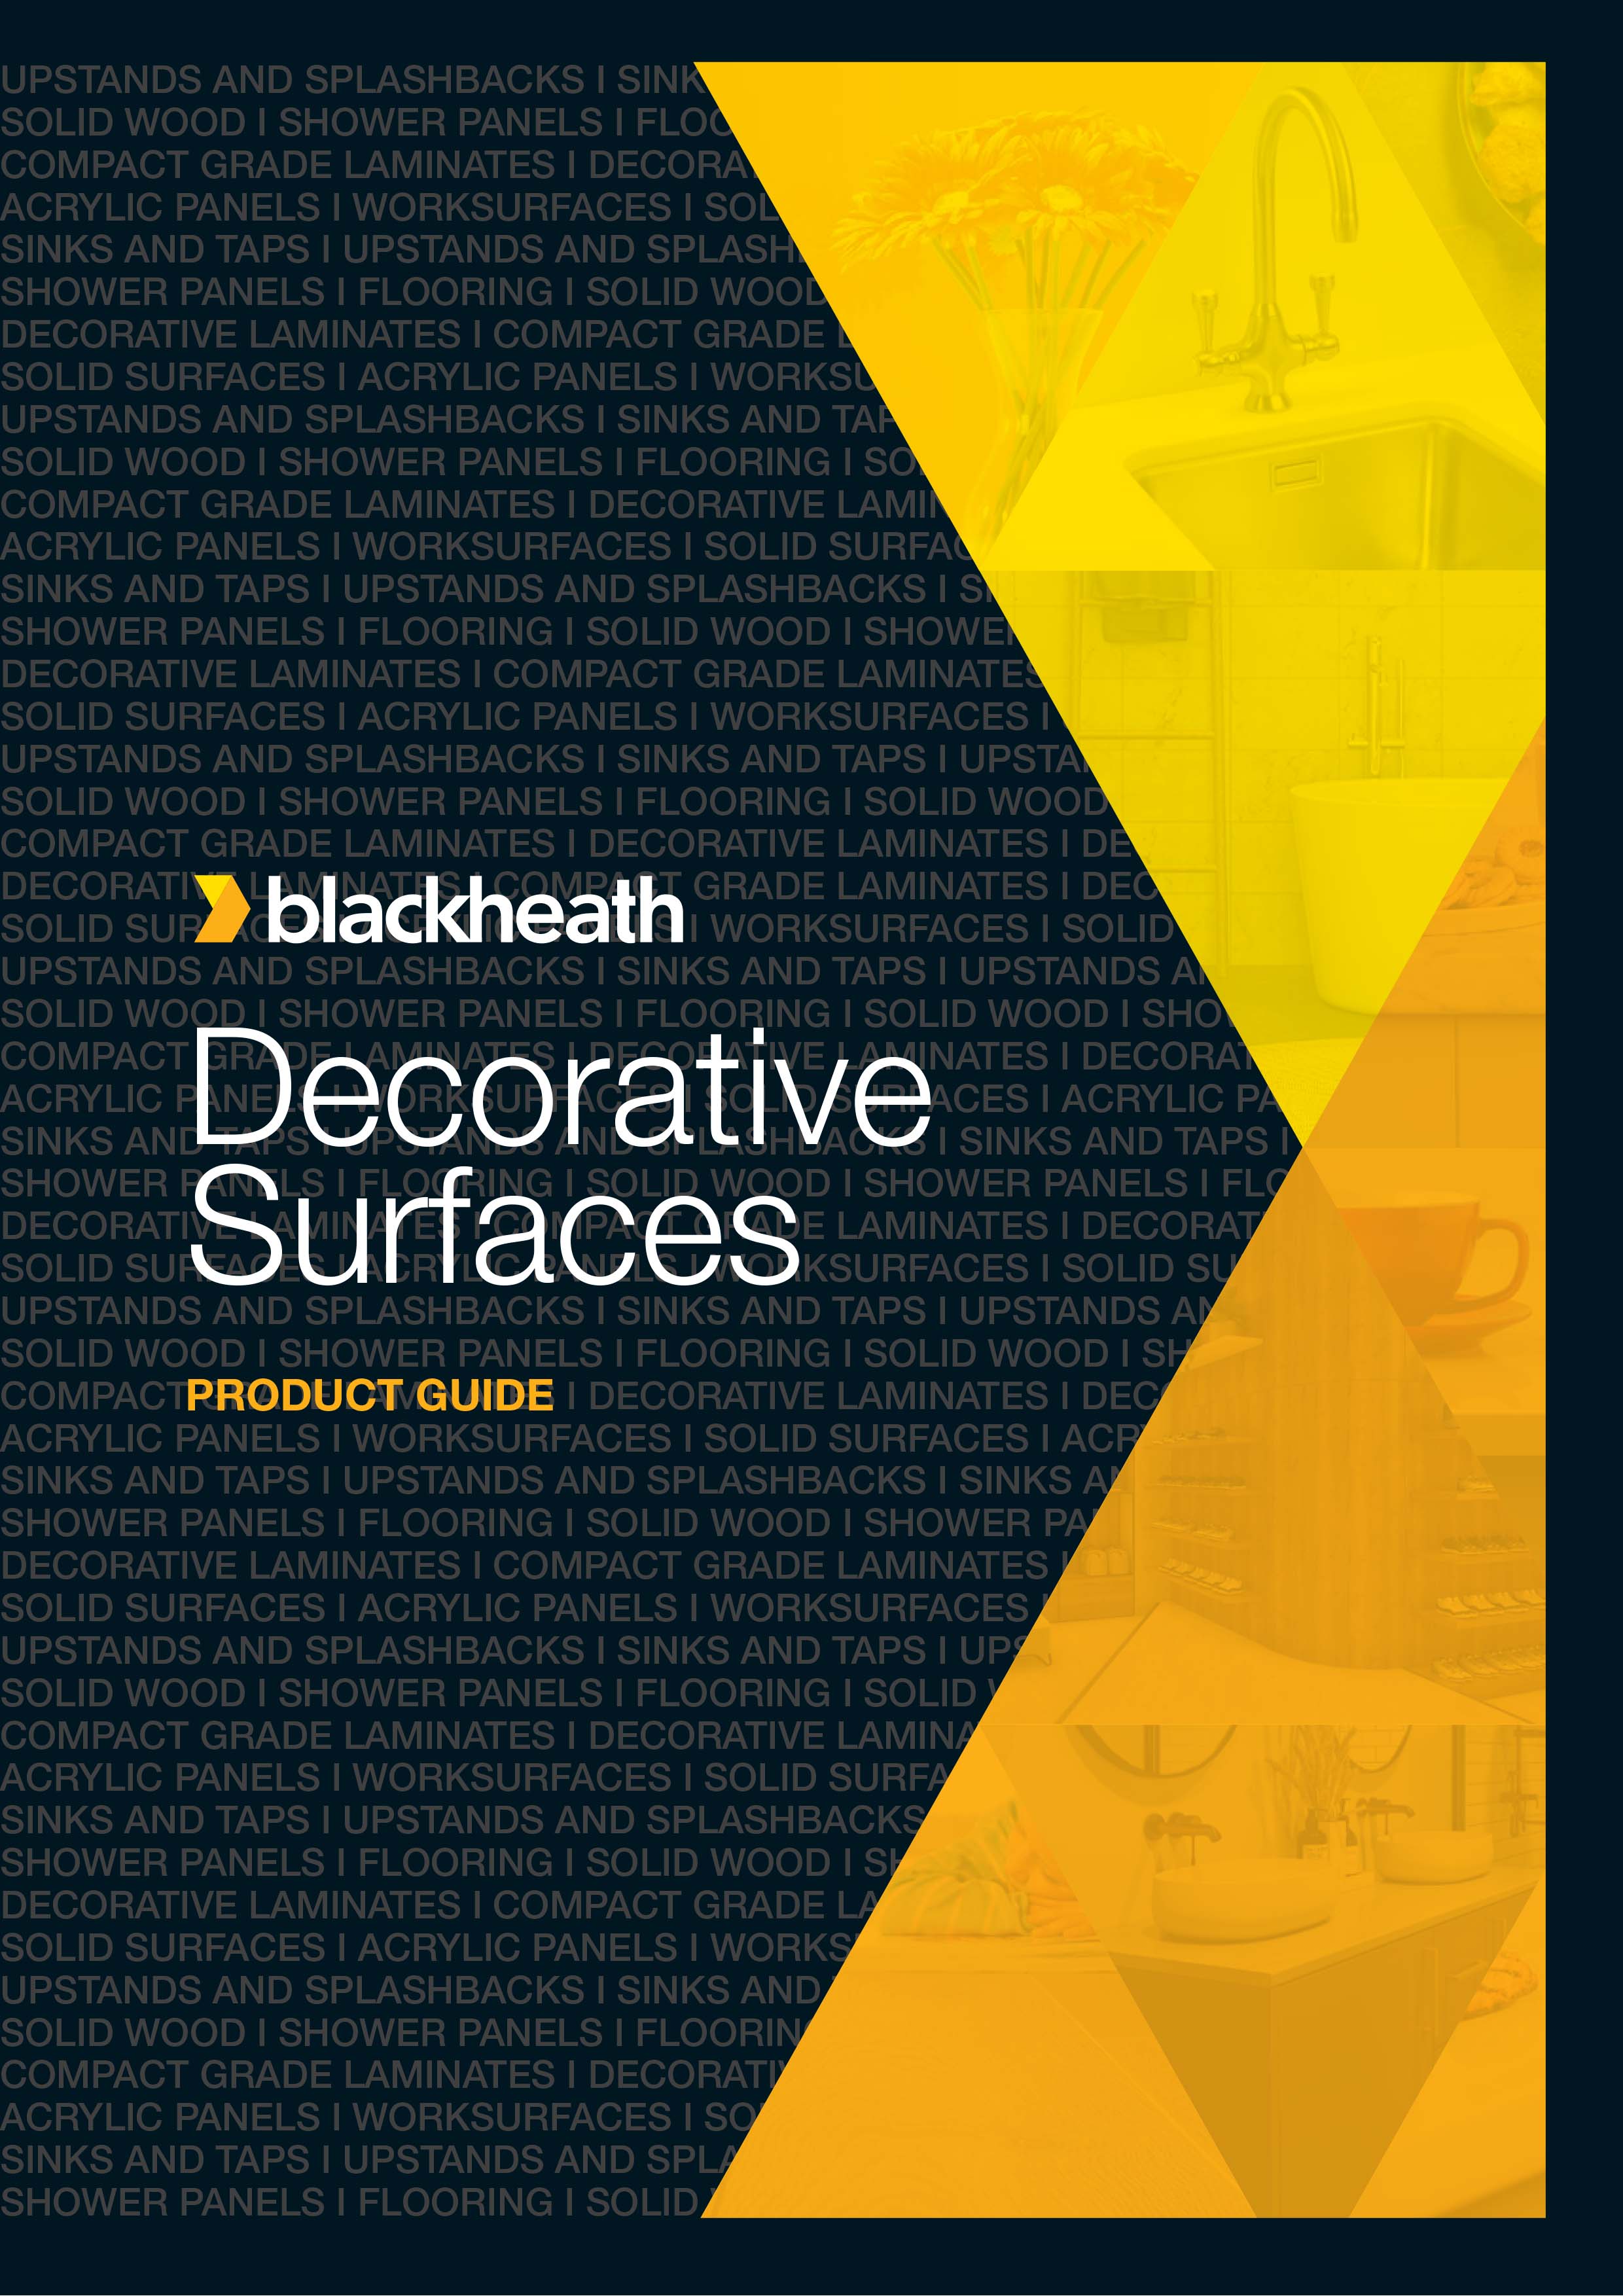 NEW Decorative Surfaces Product Guide